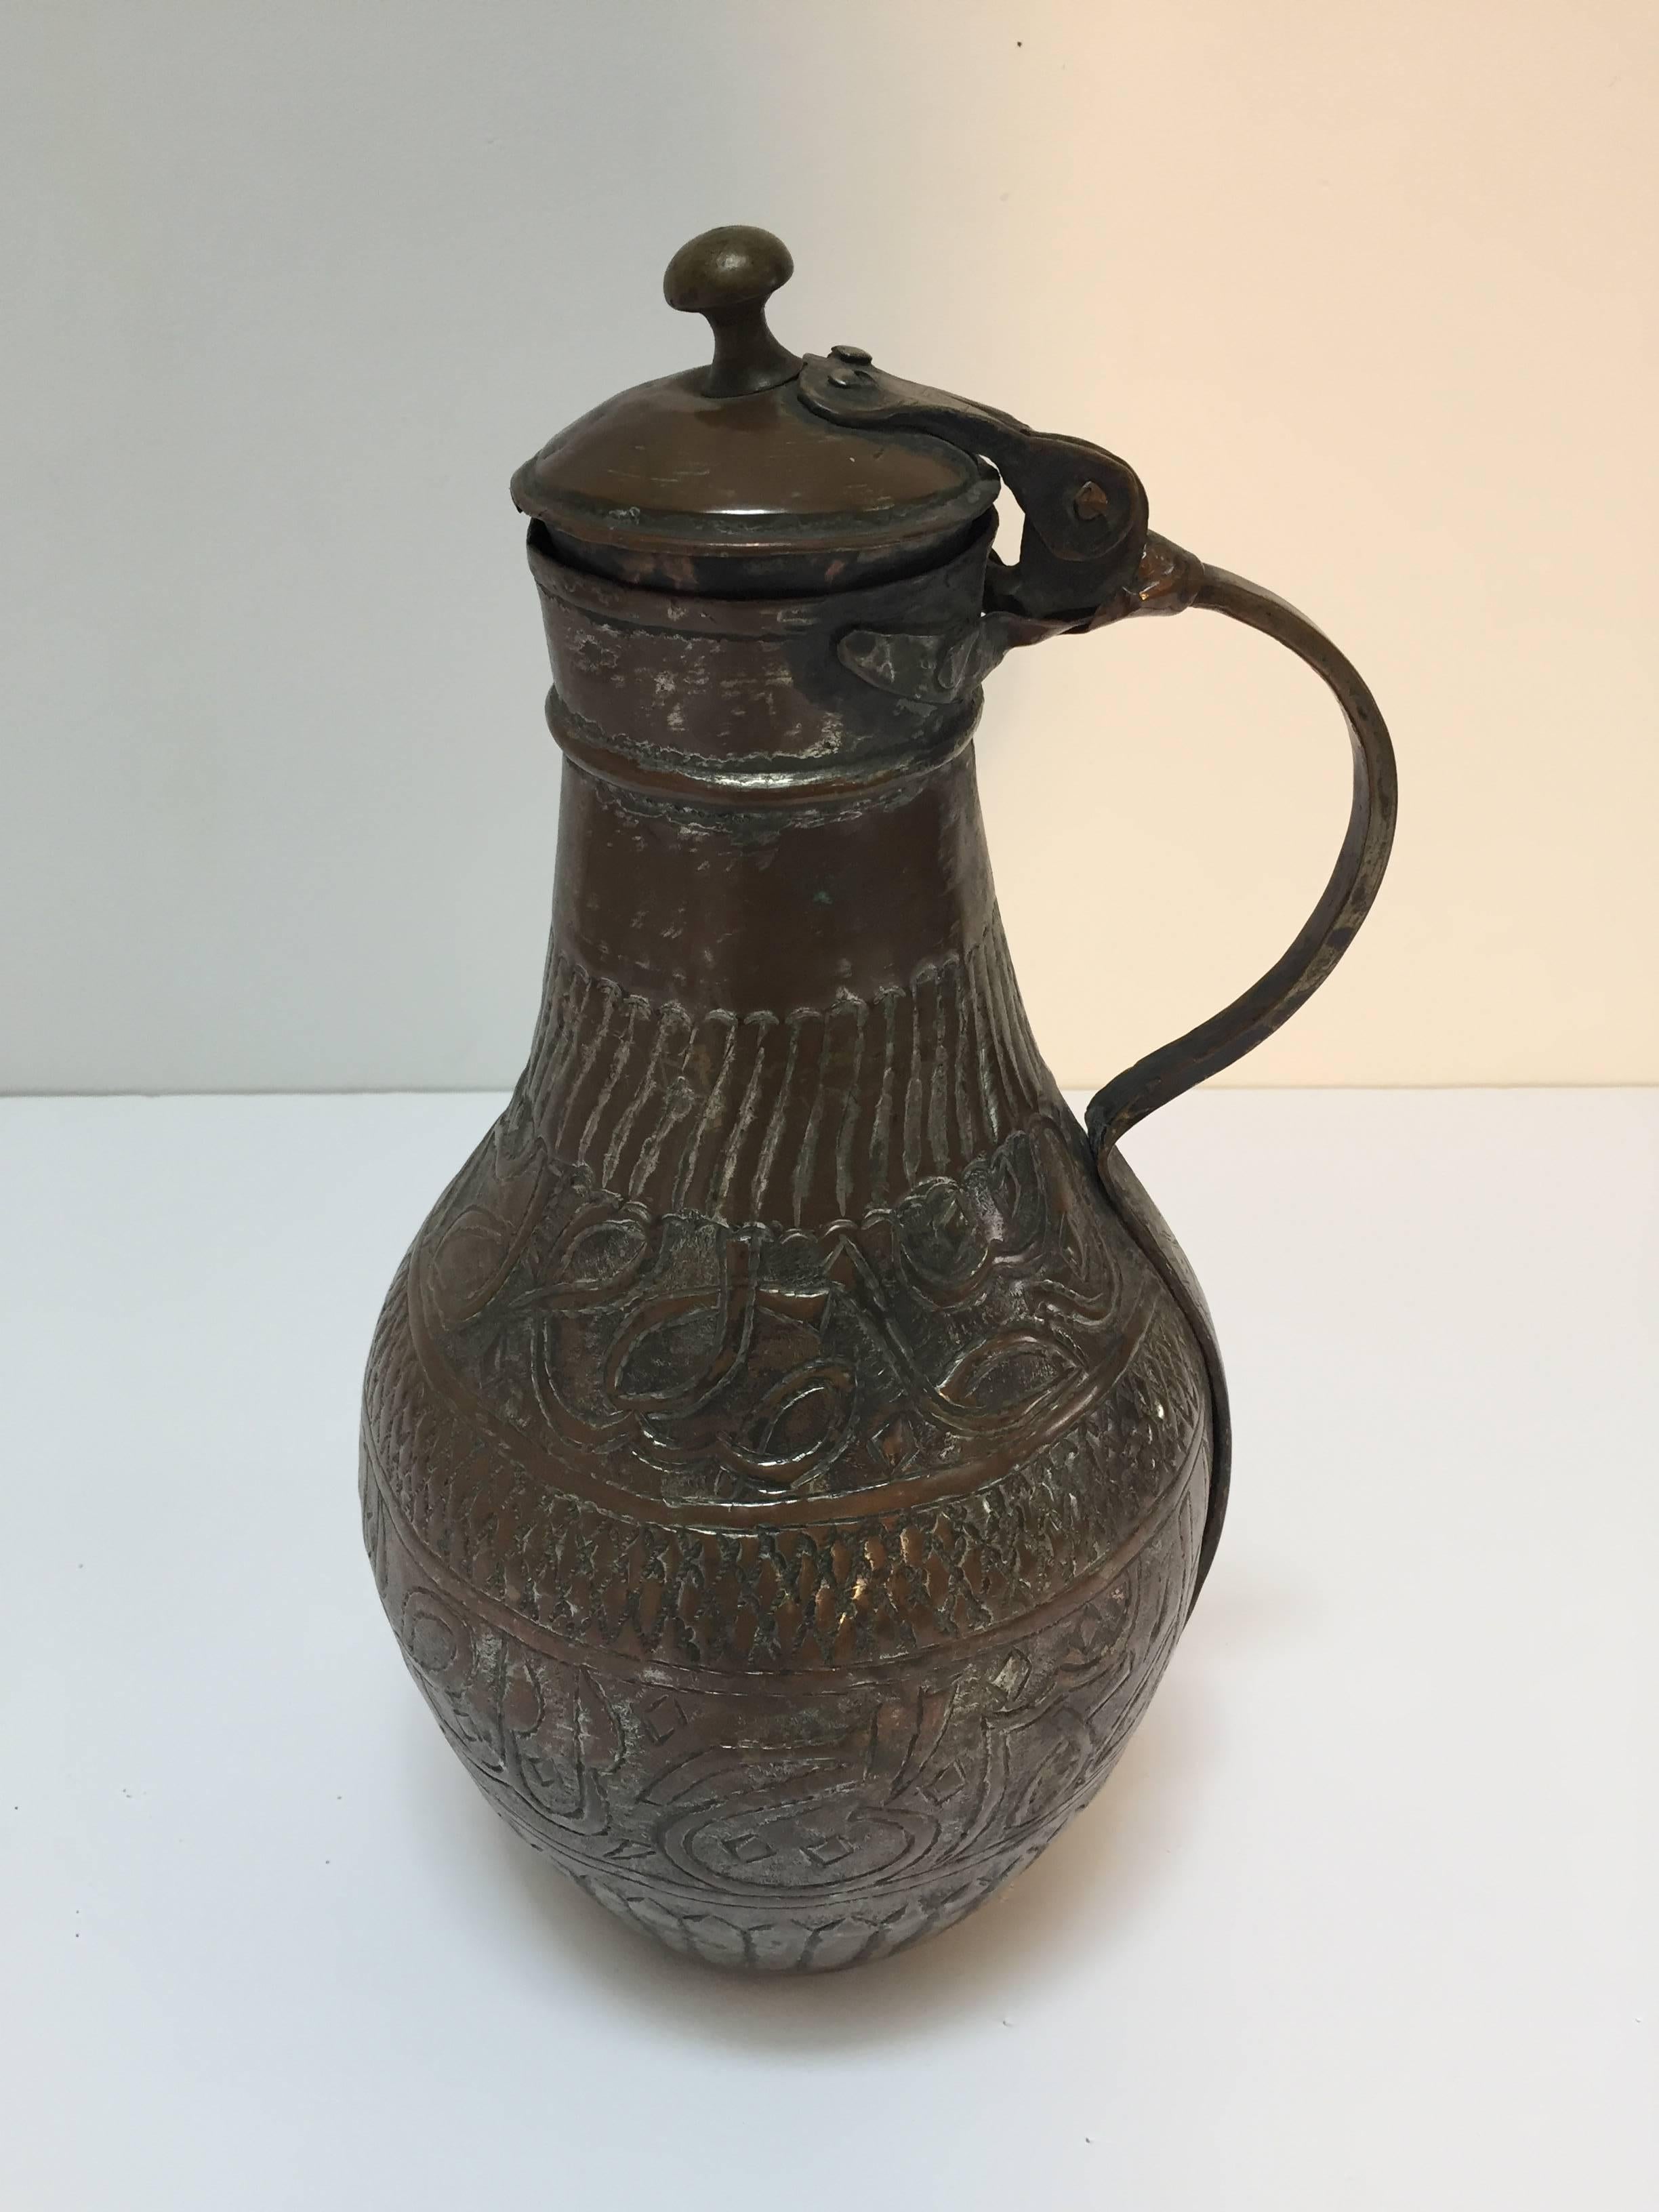 19th century Middle Eastern Arabian tinned copper ewer with lid.
Hand-hammered and chased copper with geometric design and Arabic calligraphy writing riveted finish on handle and lid.
Middle Eastern copper Moorish style ewer probably from